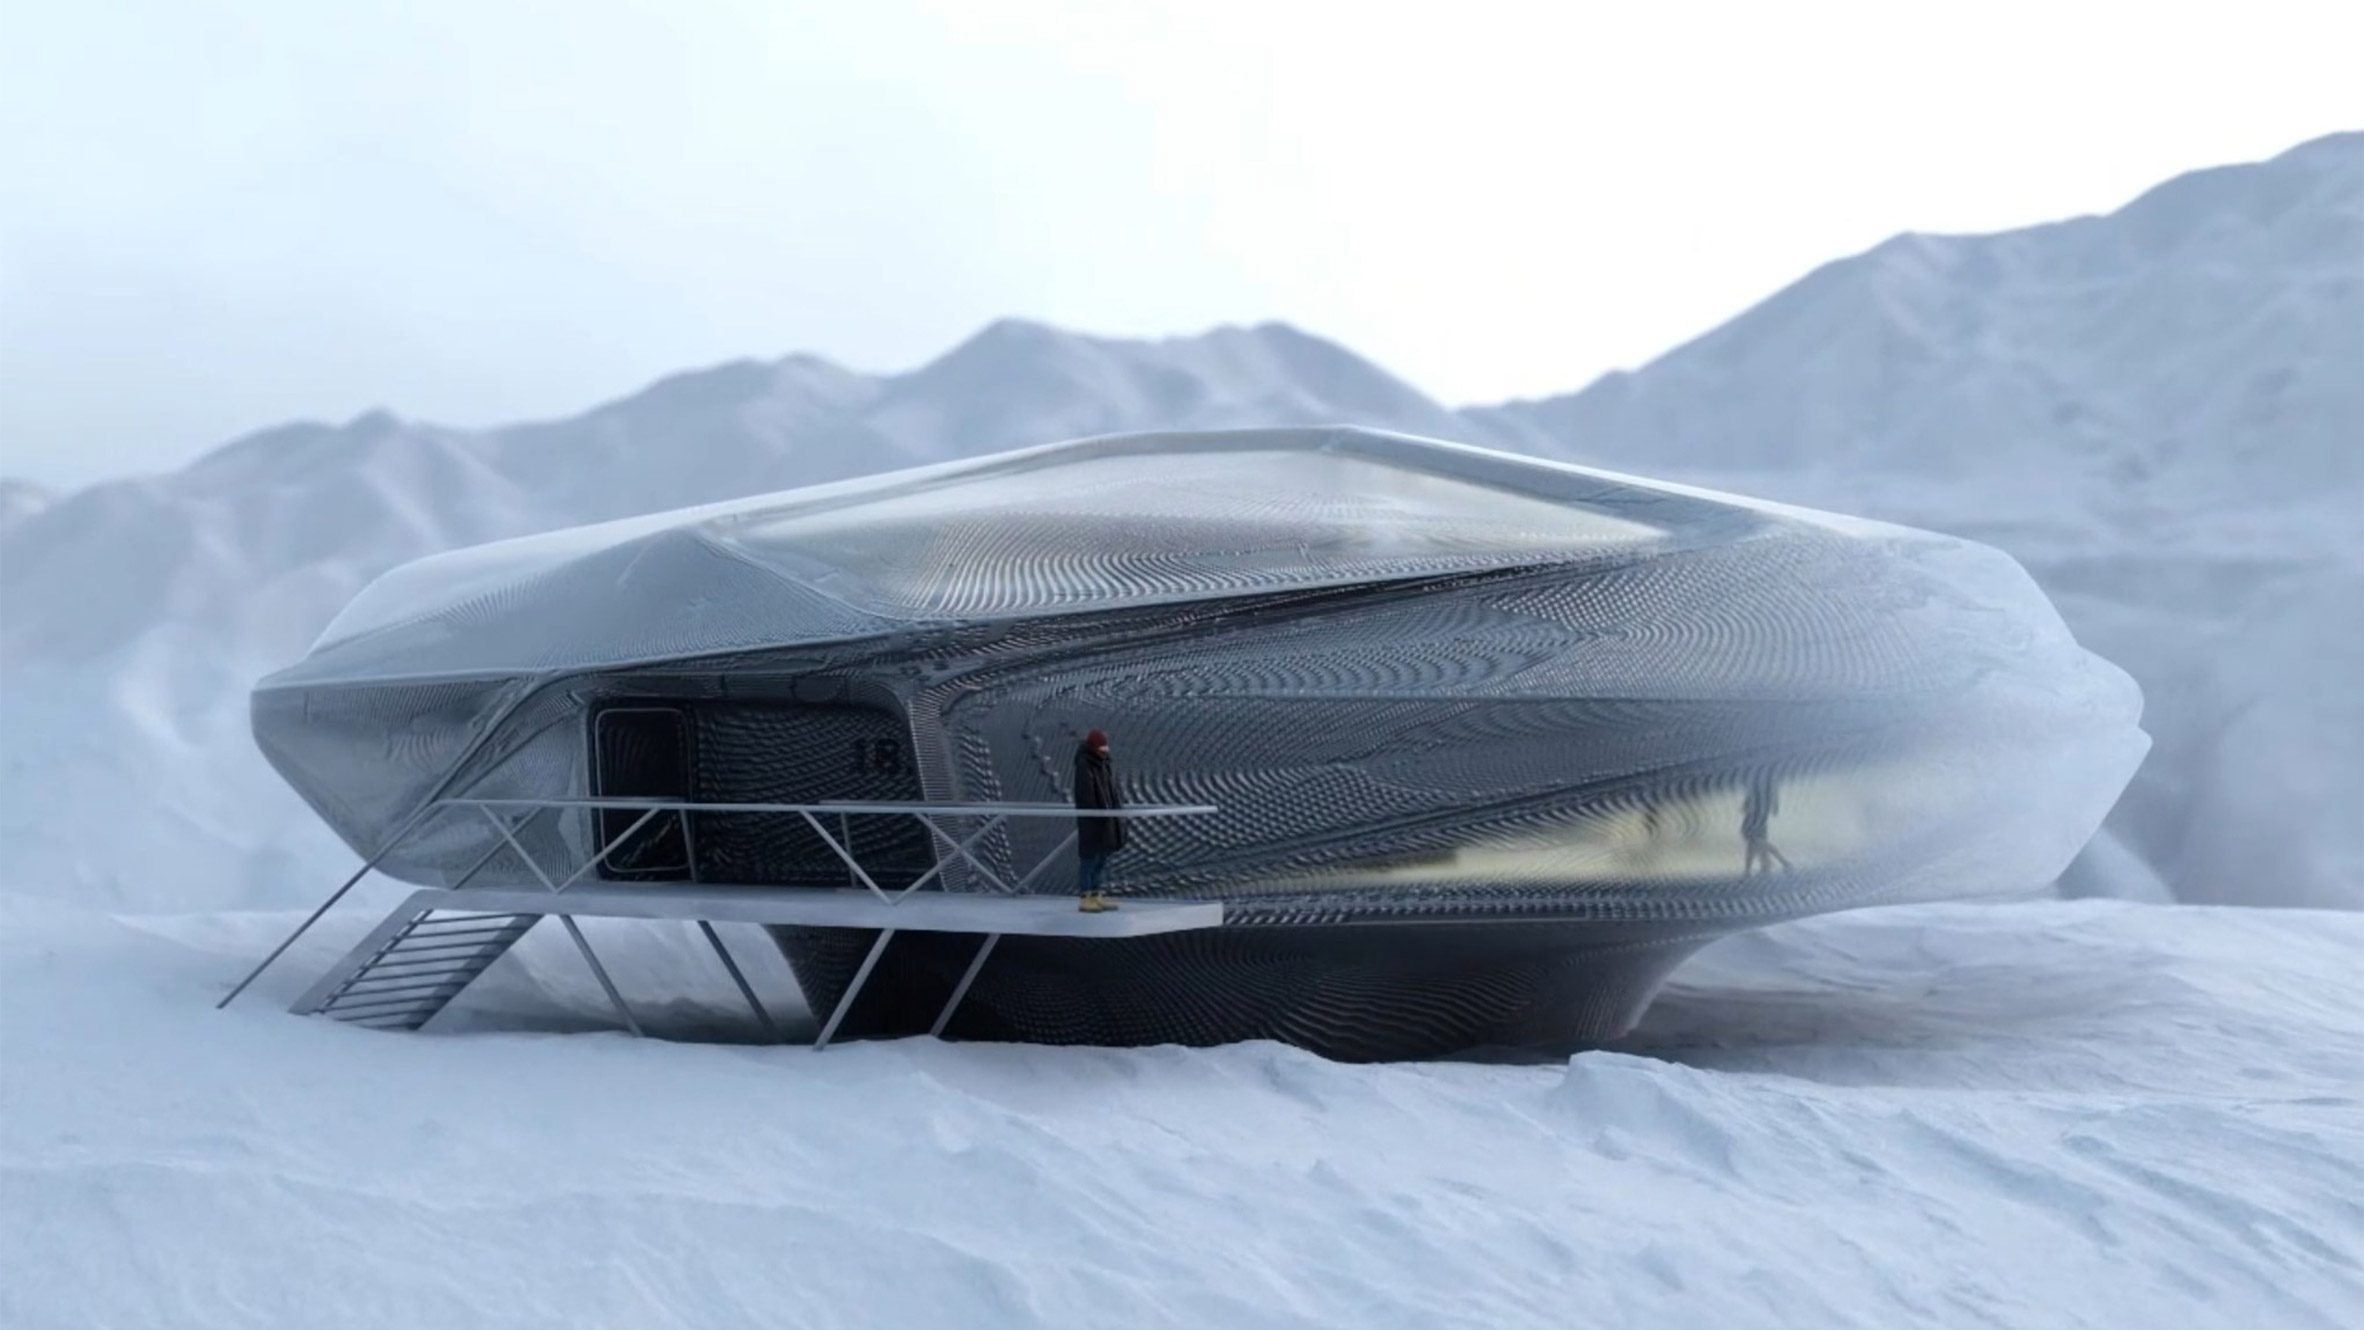 architectural visual of a UFO-like architecture on a snow-covered mountain